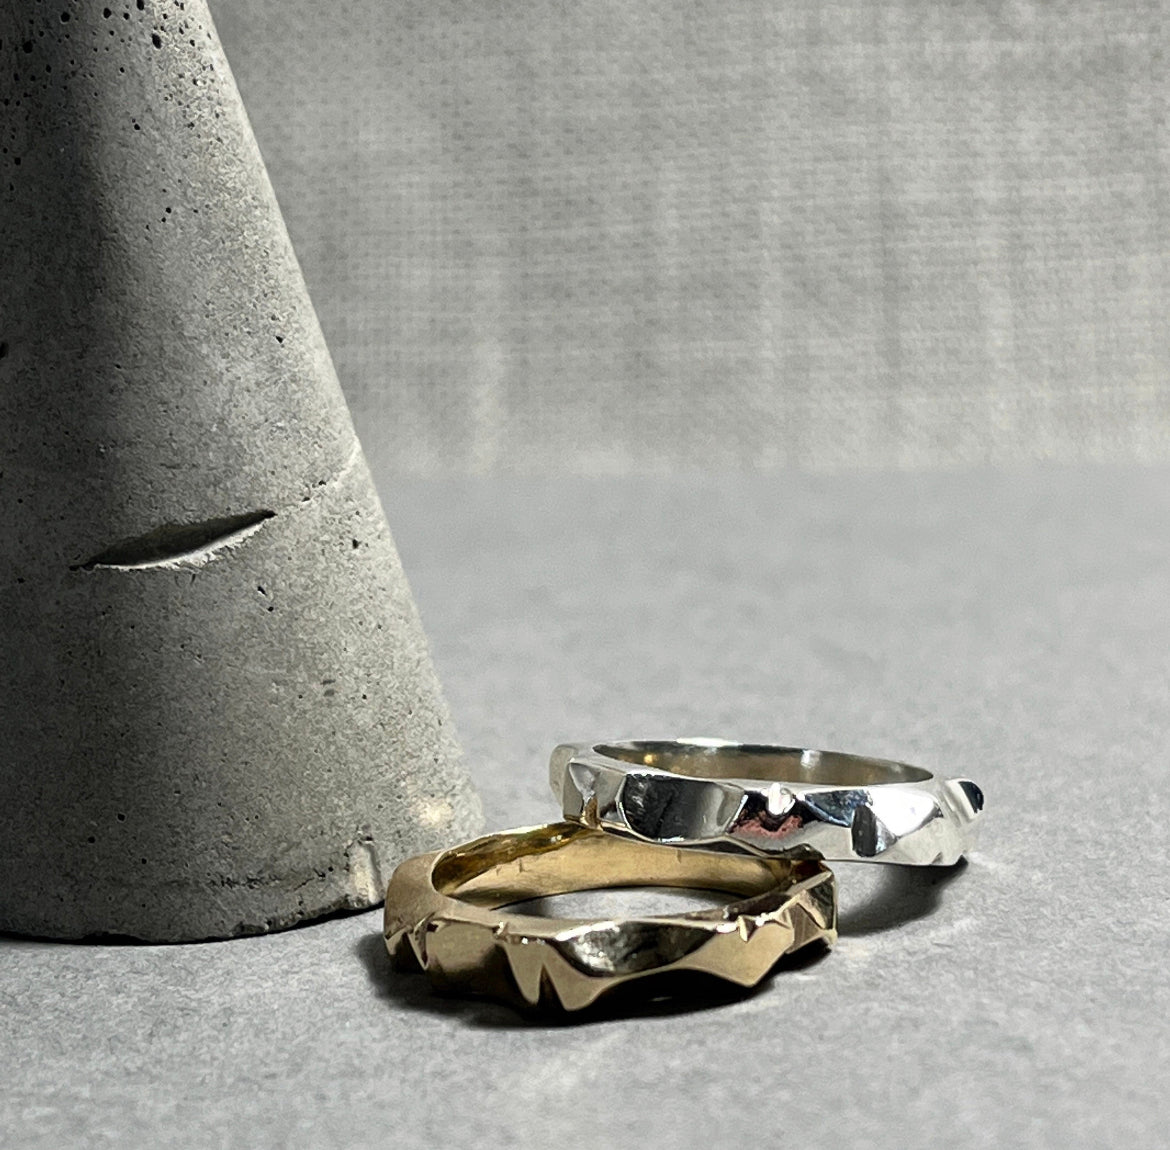 Two custom made rings, one gold and one silver, both shaped in an organic way